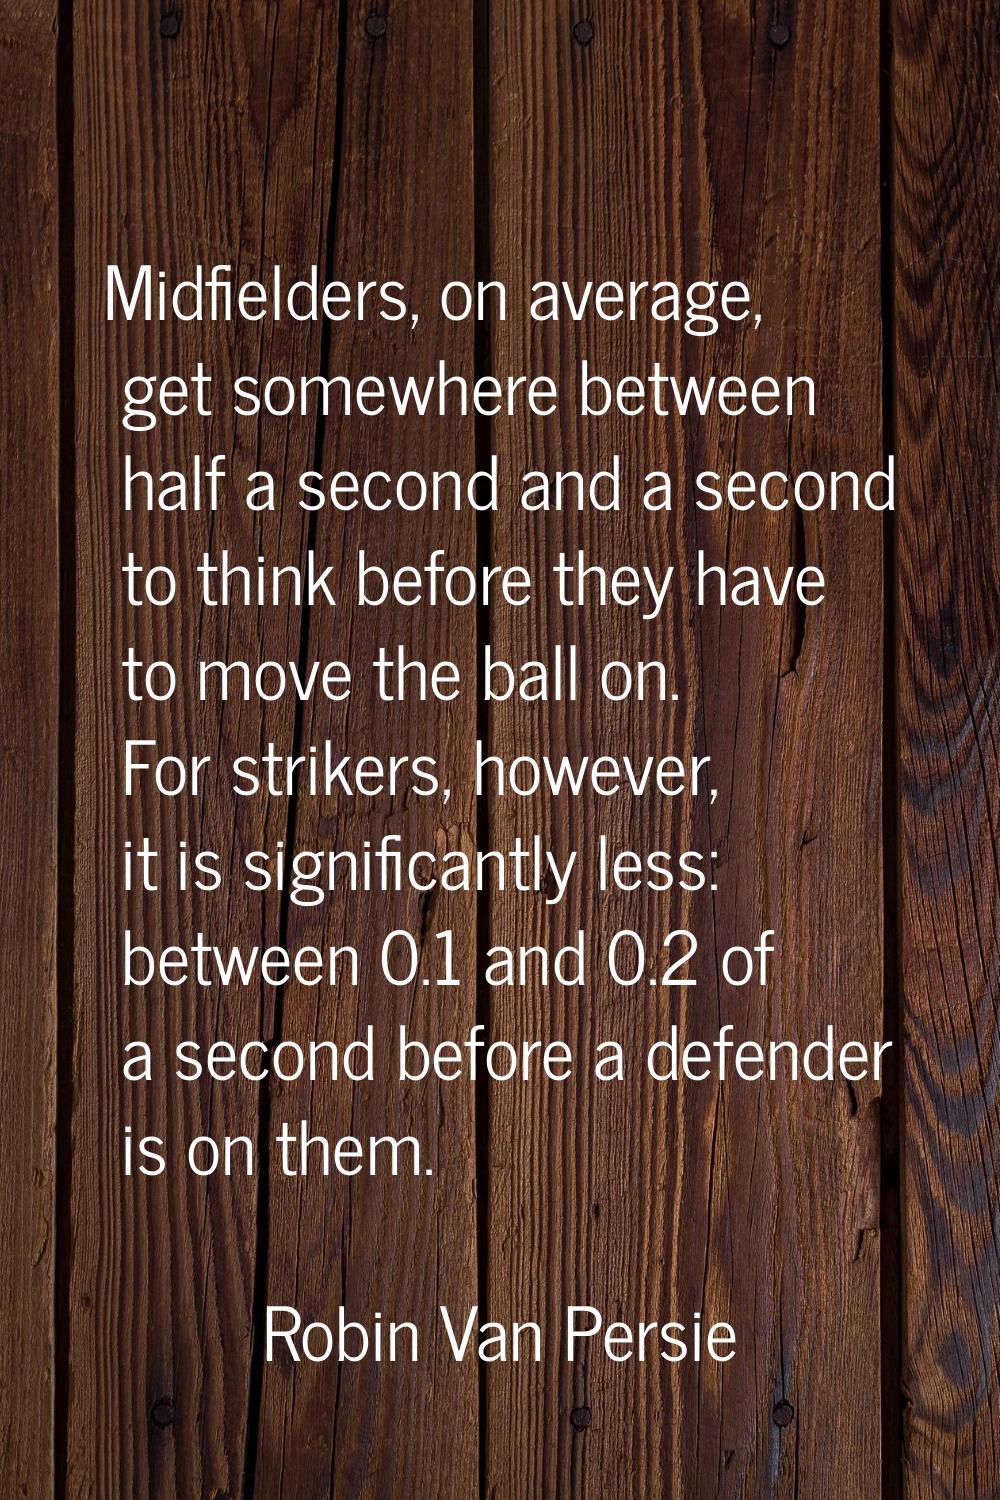 Midfielders, on average, get somewhere between half a second and a second to think before they have